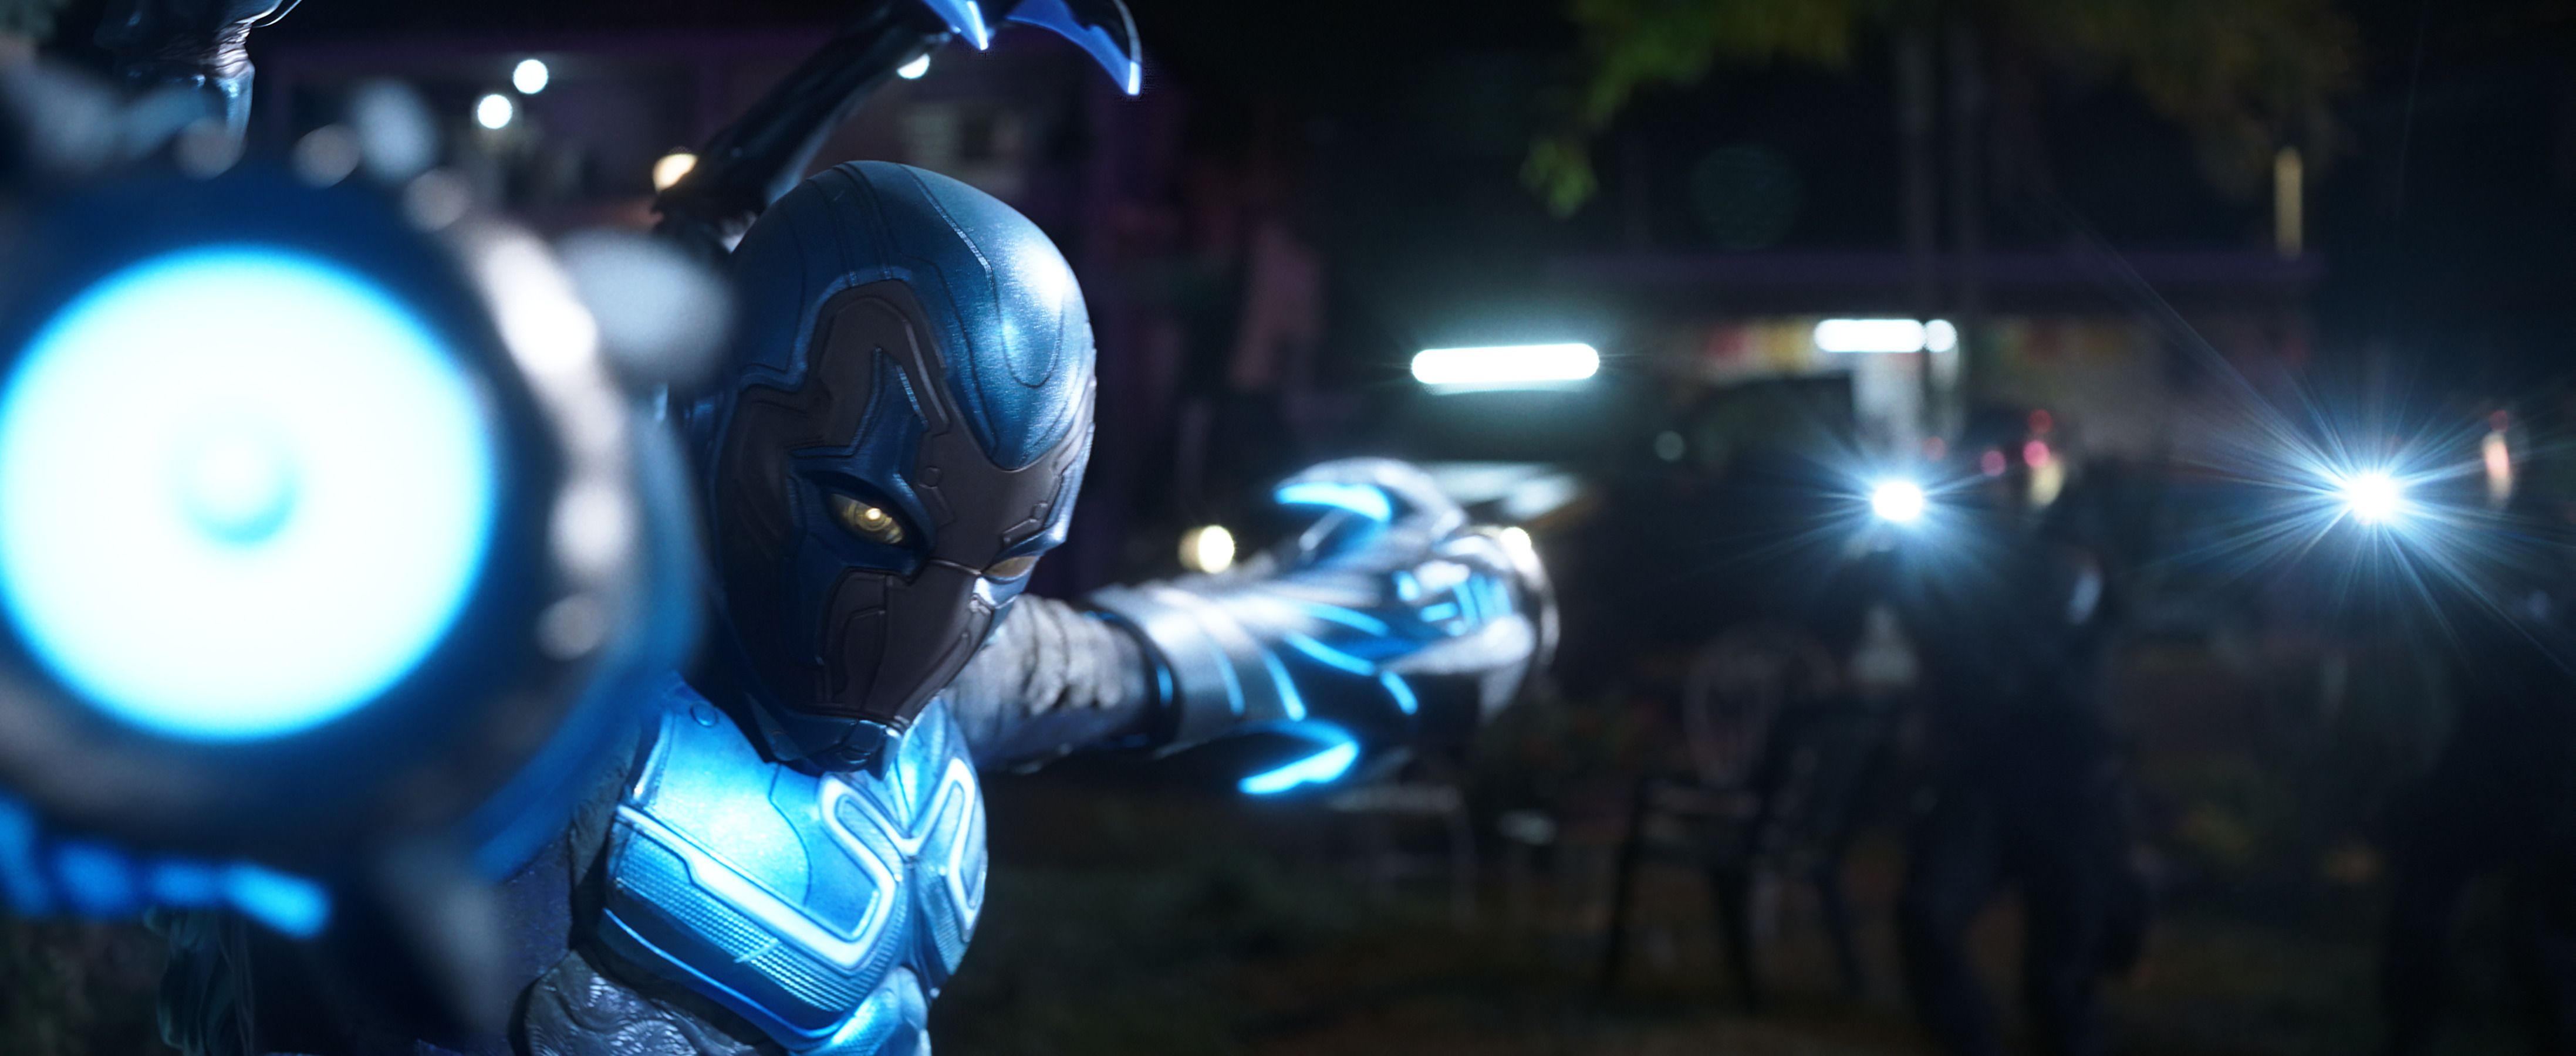 How to watch Blue Beetle – is it streaming? - Dexerto